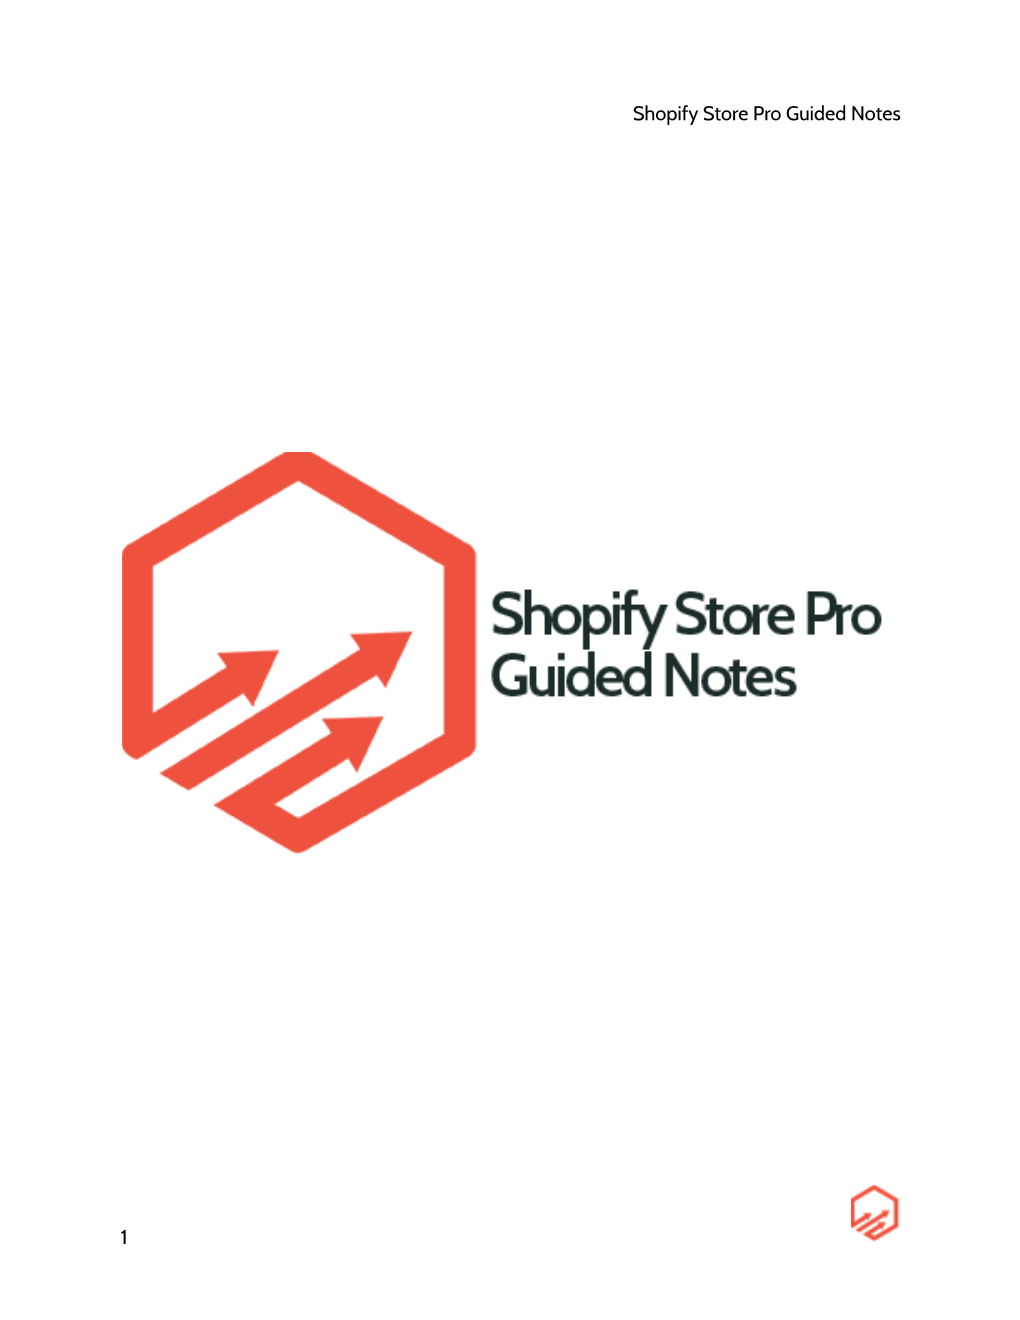 Shopify Store Pro Guided Notes